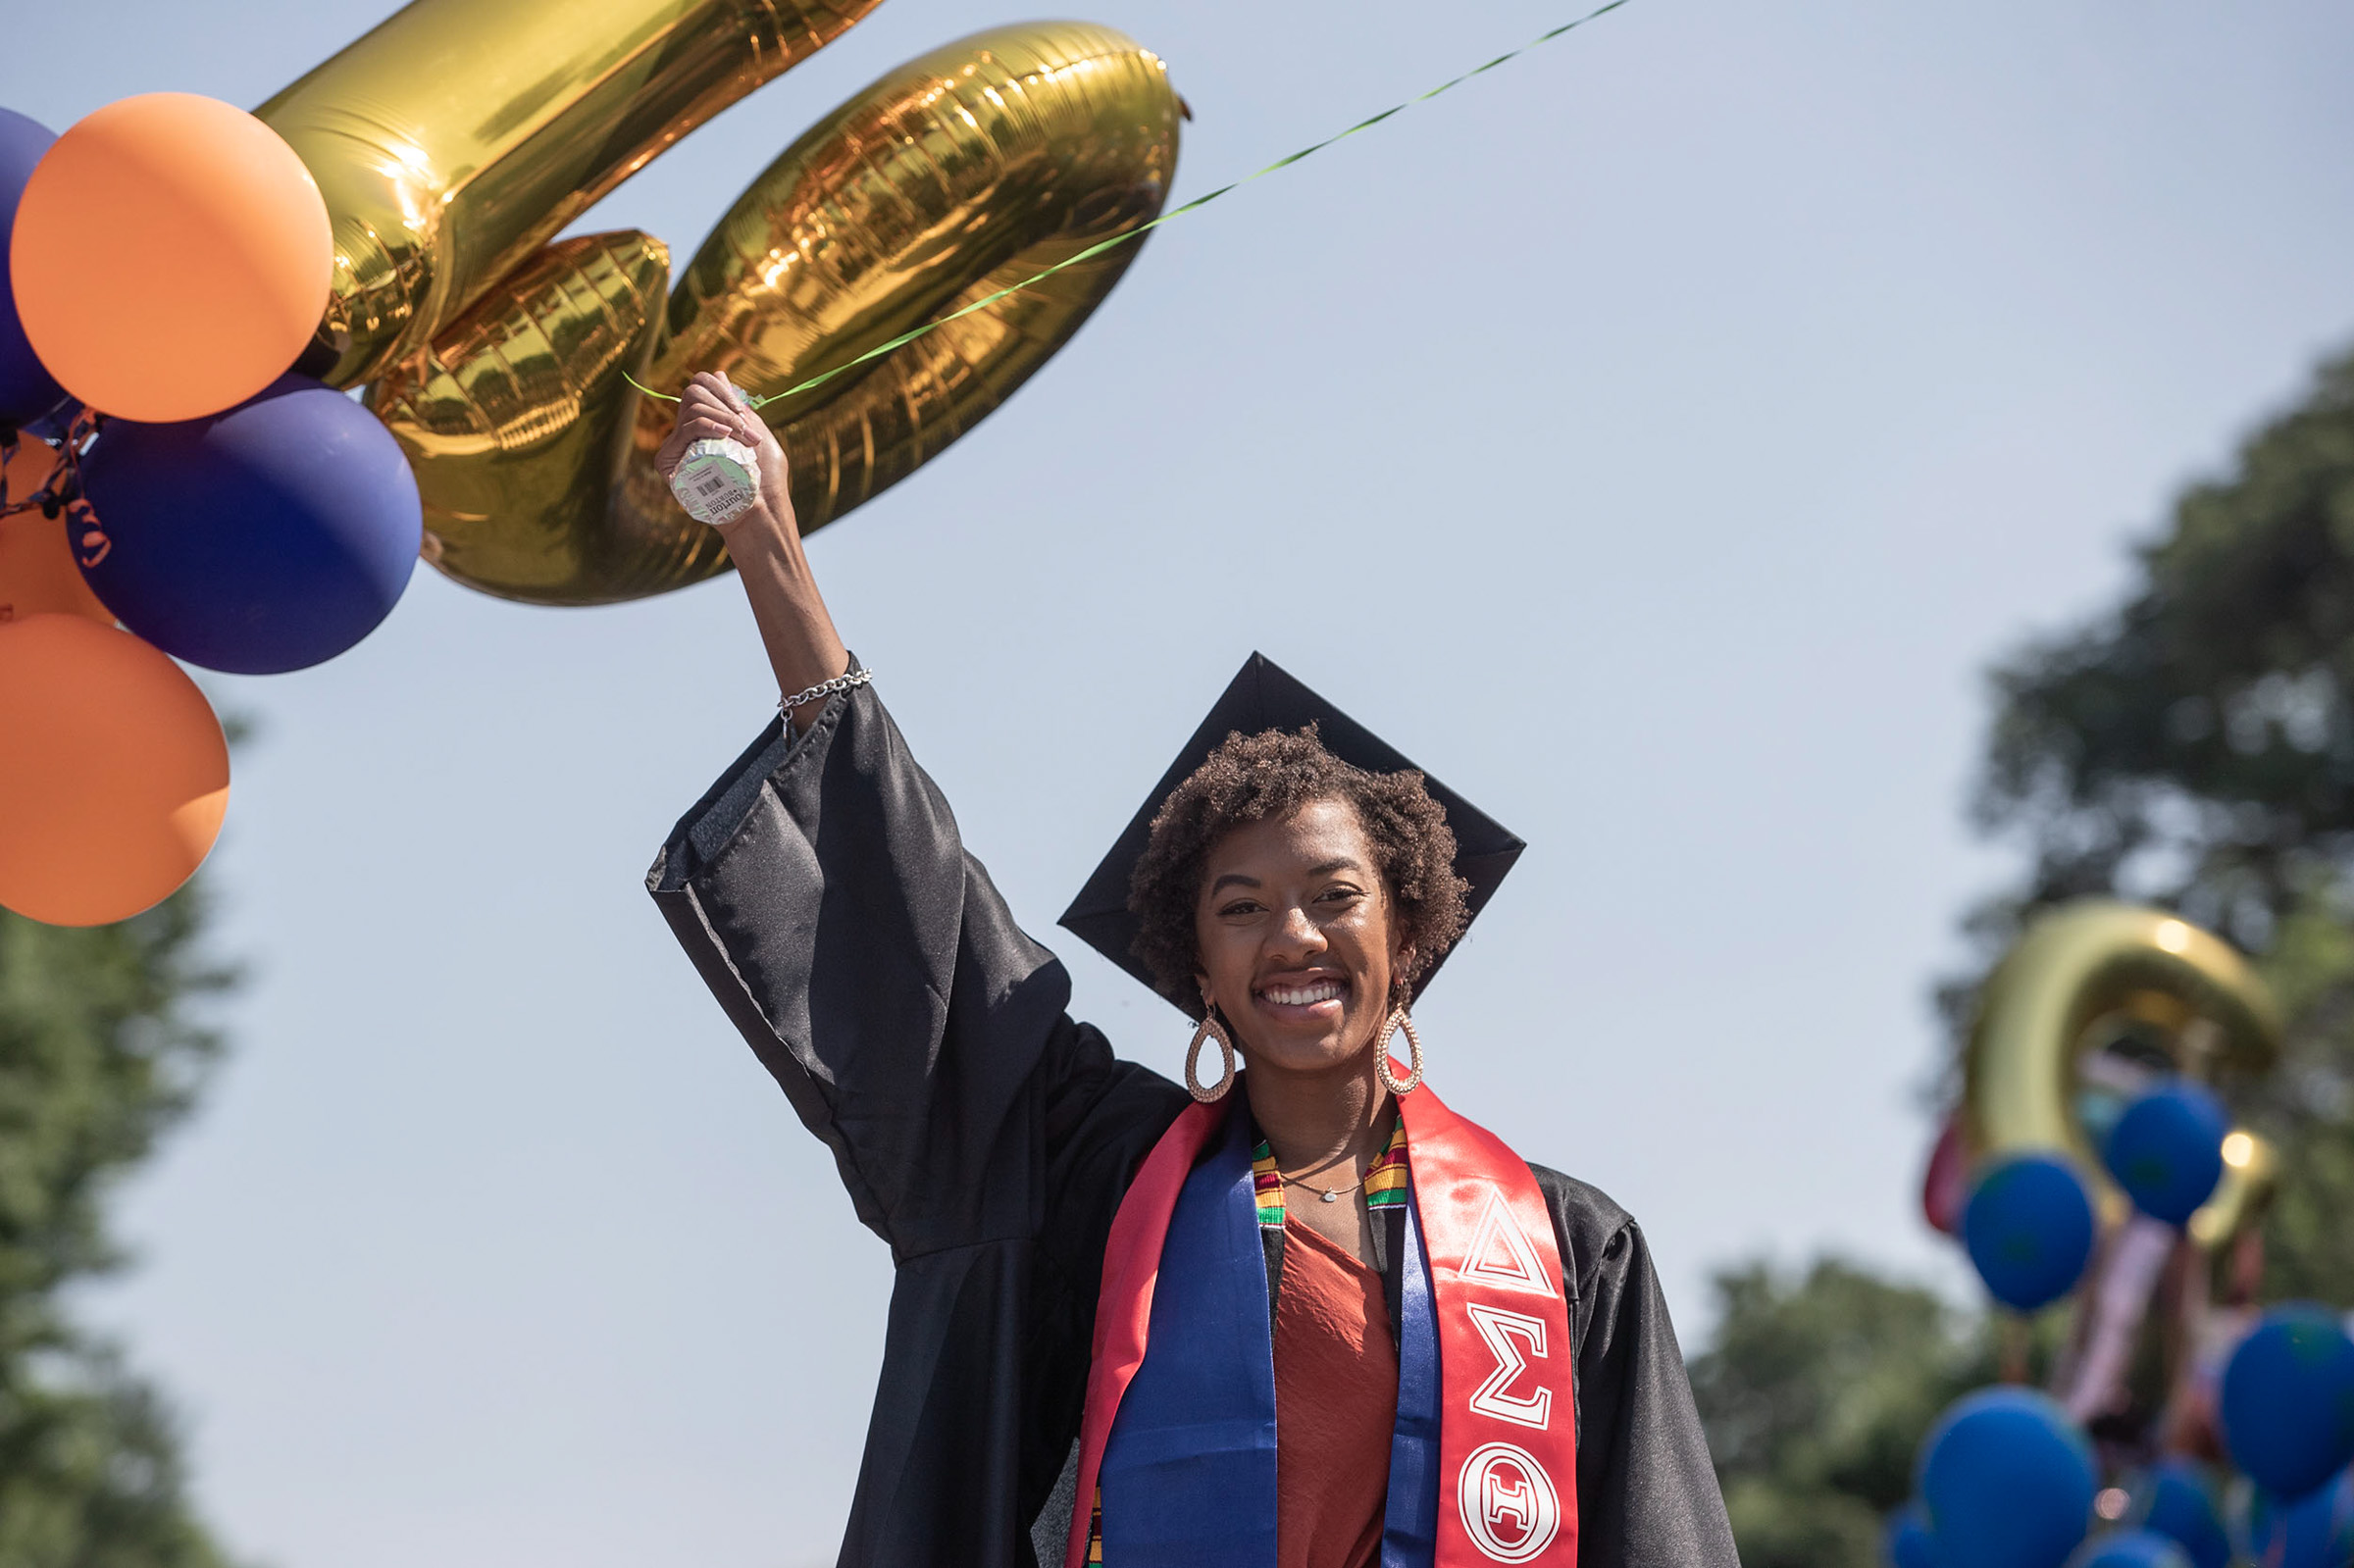 Graduate with right arm raised holding golden balloons